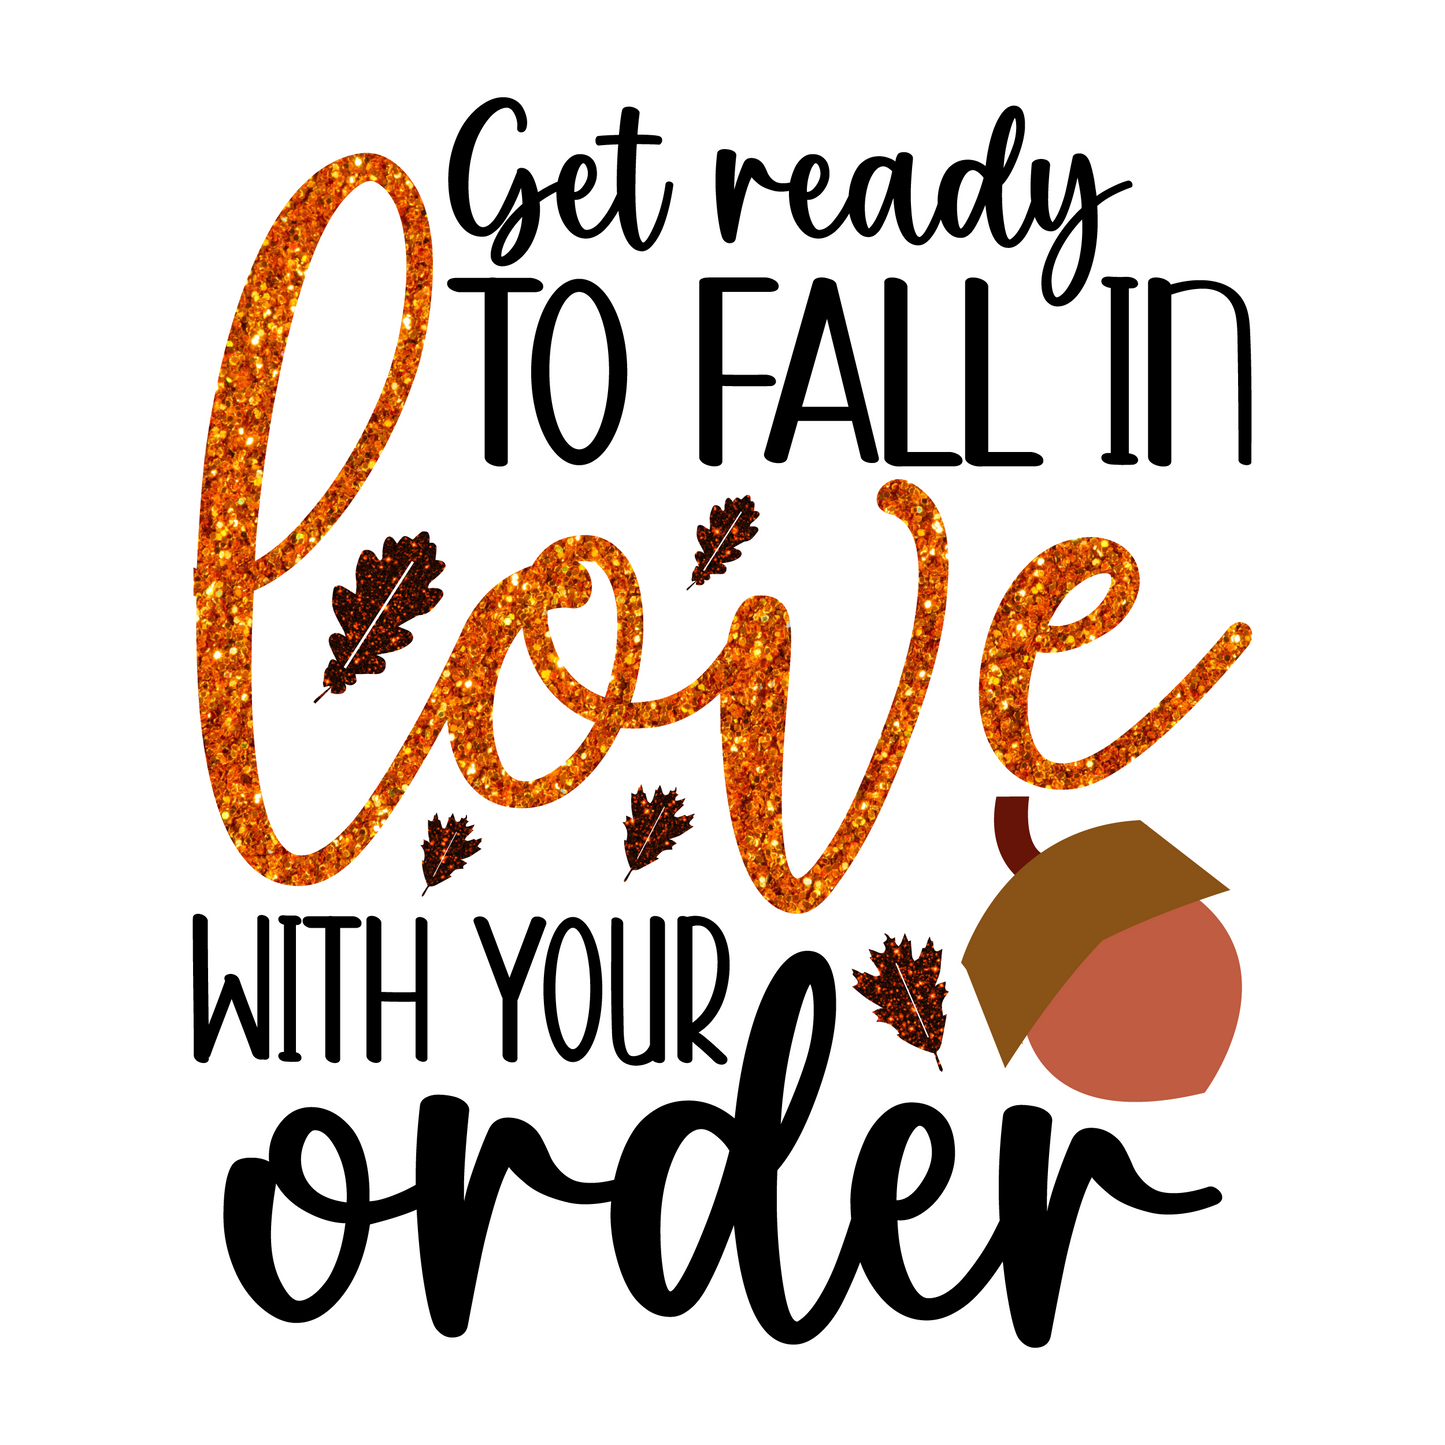 Inspirational Quote Get Ready To Fall In Love With Your Order Motivational Sticker Vinyl Decal Motivation Stickers- 5" Vinyl Sticker Waterproof